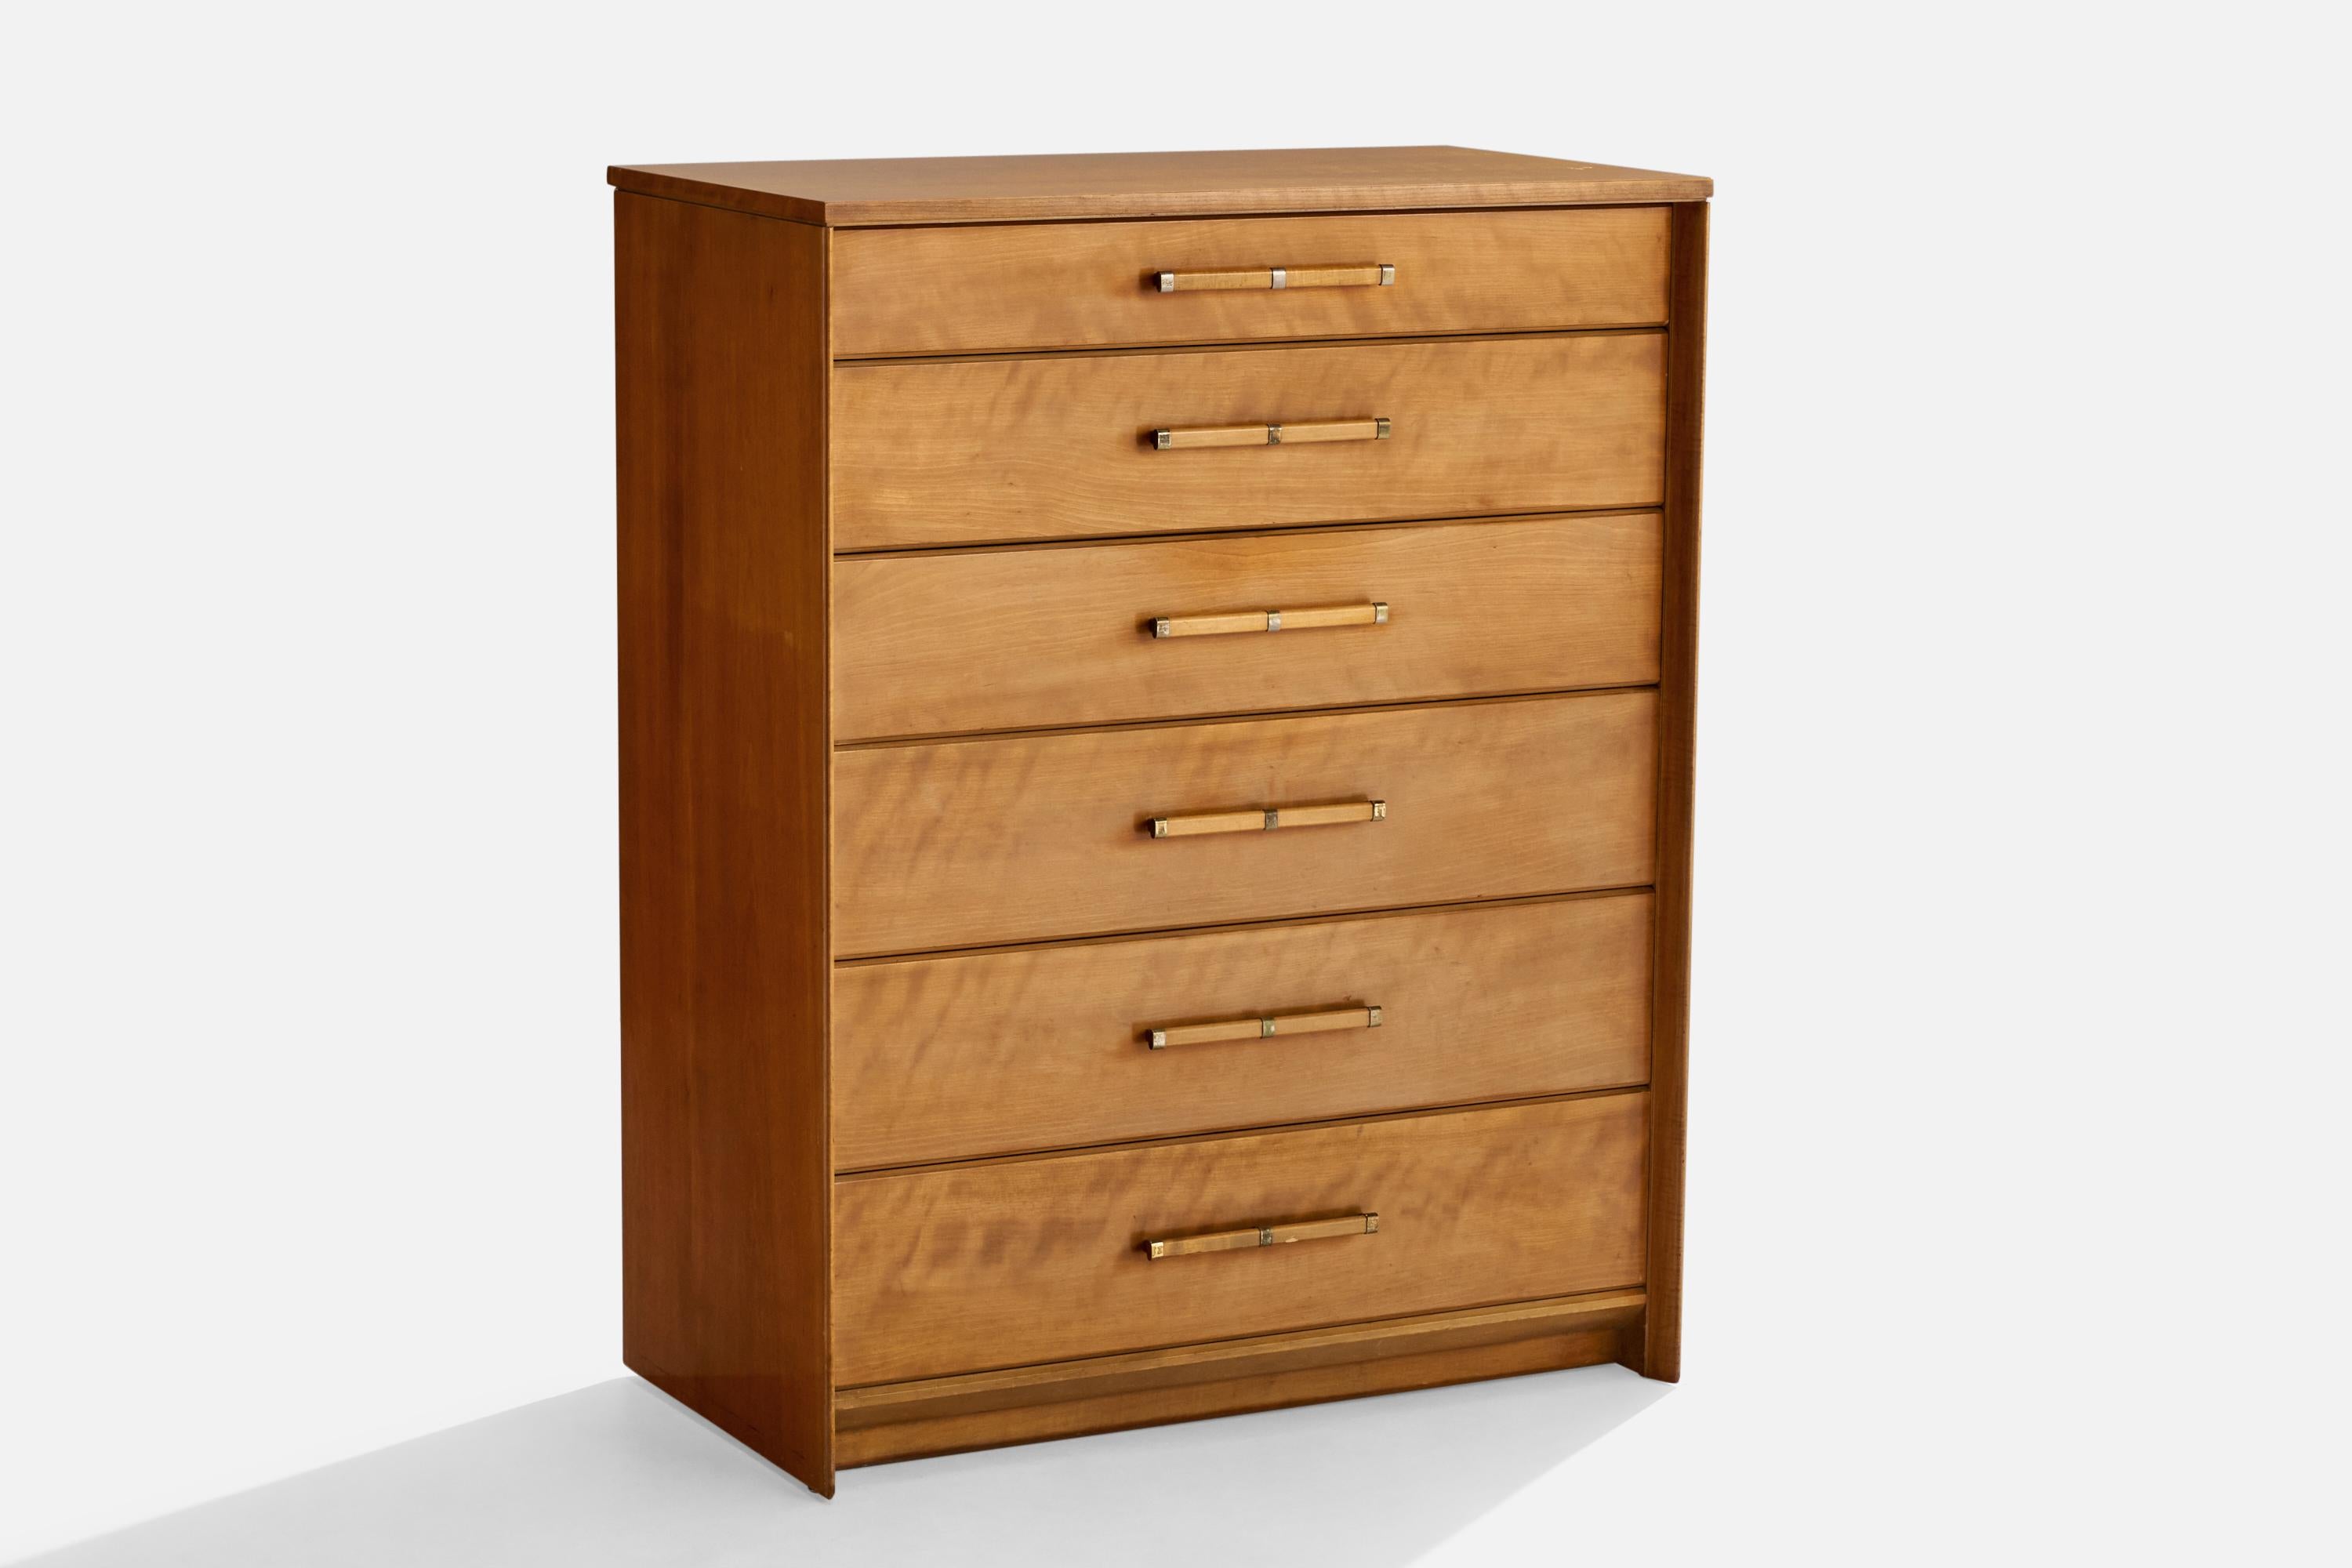 A maple and brass chest of drawers produced by Johnson Furniture Company, design attributed to Renzo Rutili, USA, 1940s.